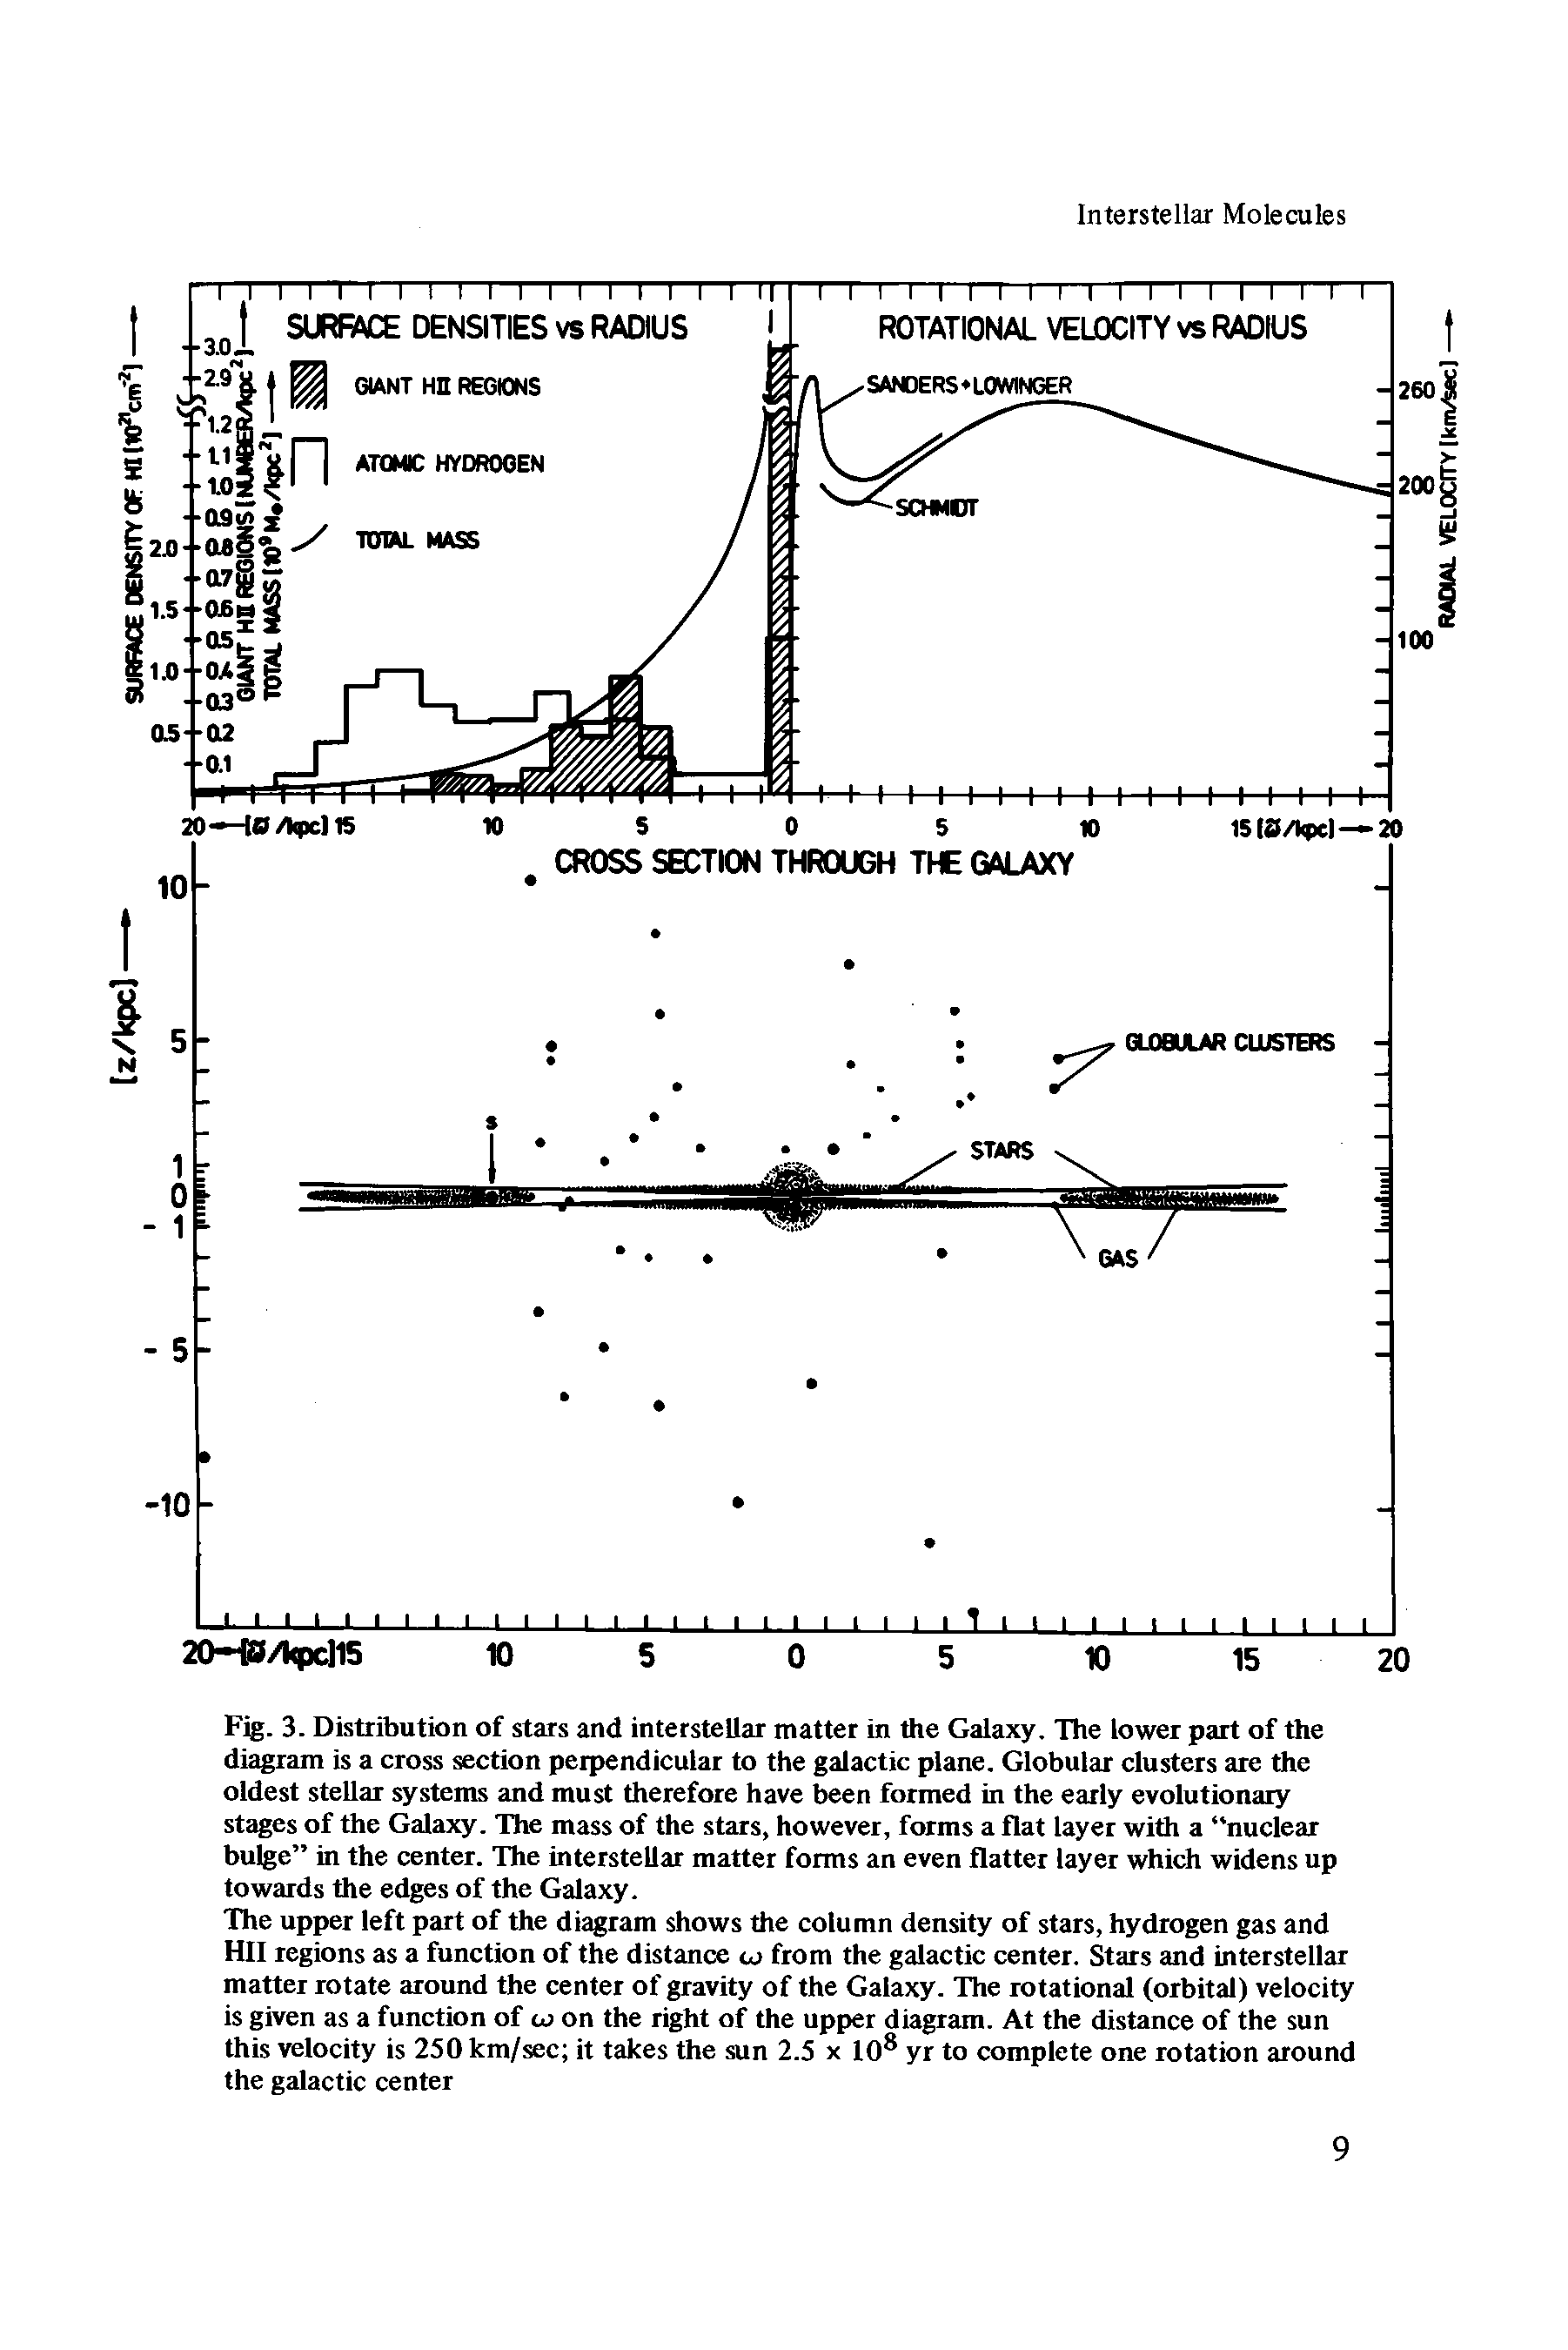 Fig. 3. Distribution of stars and interstellar matter in the Galaxy. The lower part of the diagram is a cross section perpendicular to the galactic plane. Globular clusters are the oldest stellar systems and must therefore have been formed in the early evolutionary stages of the Galaxy. The mass of the stars, however, forms a flat layer with a nuclear bulge in the center. The interstellar matter forms an even flatter layer which widens up towards the edges of the Galaxy.